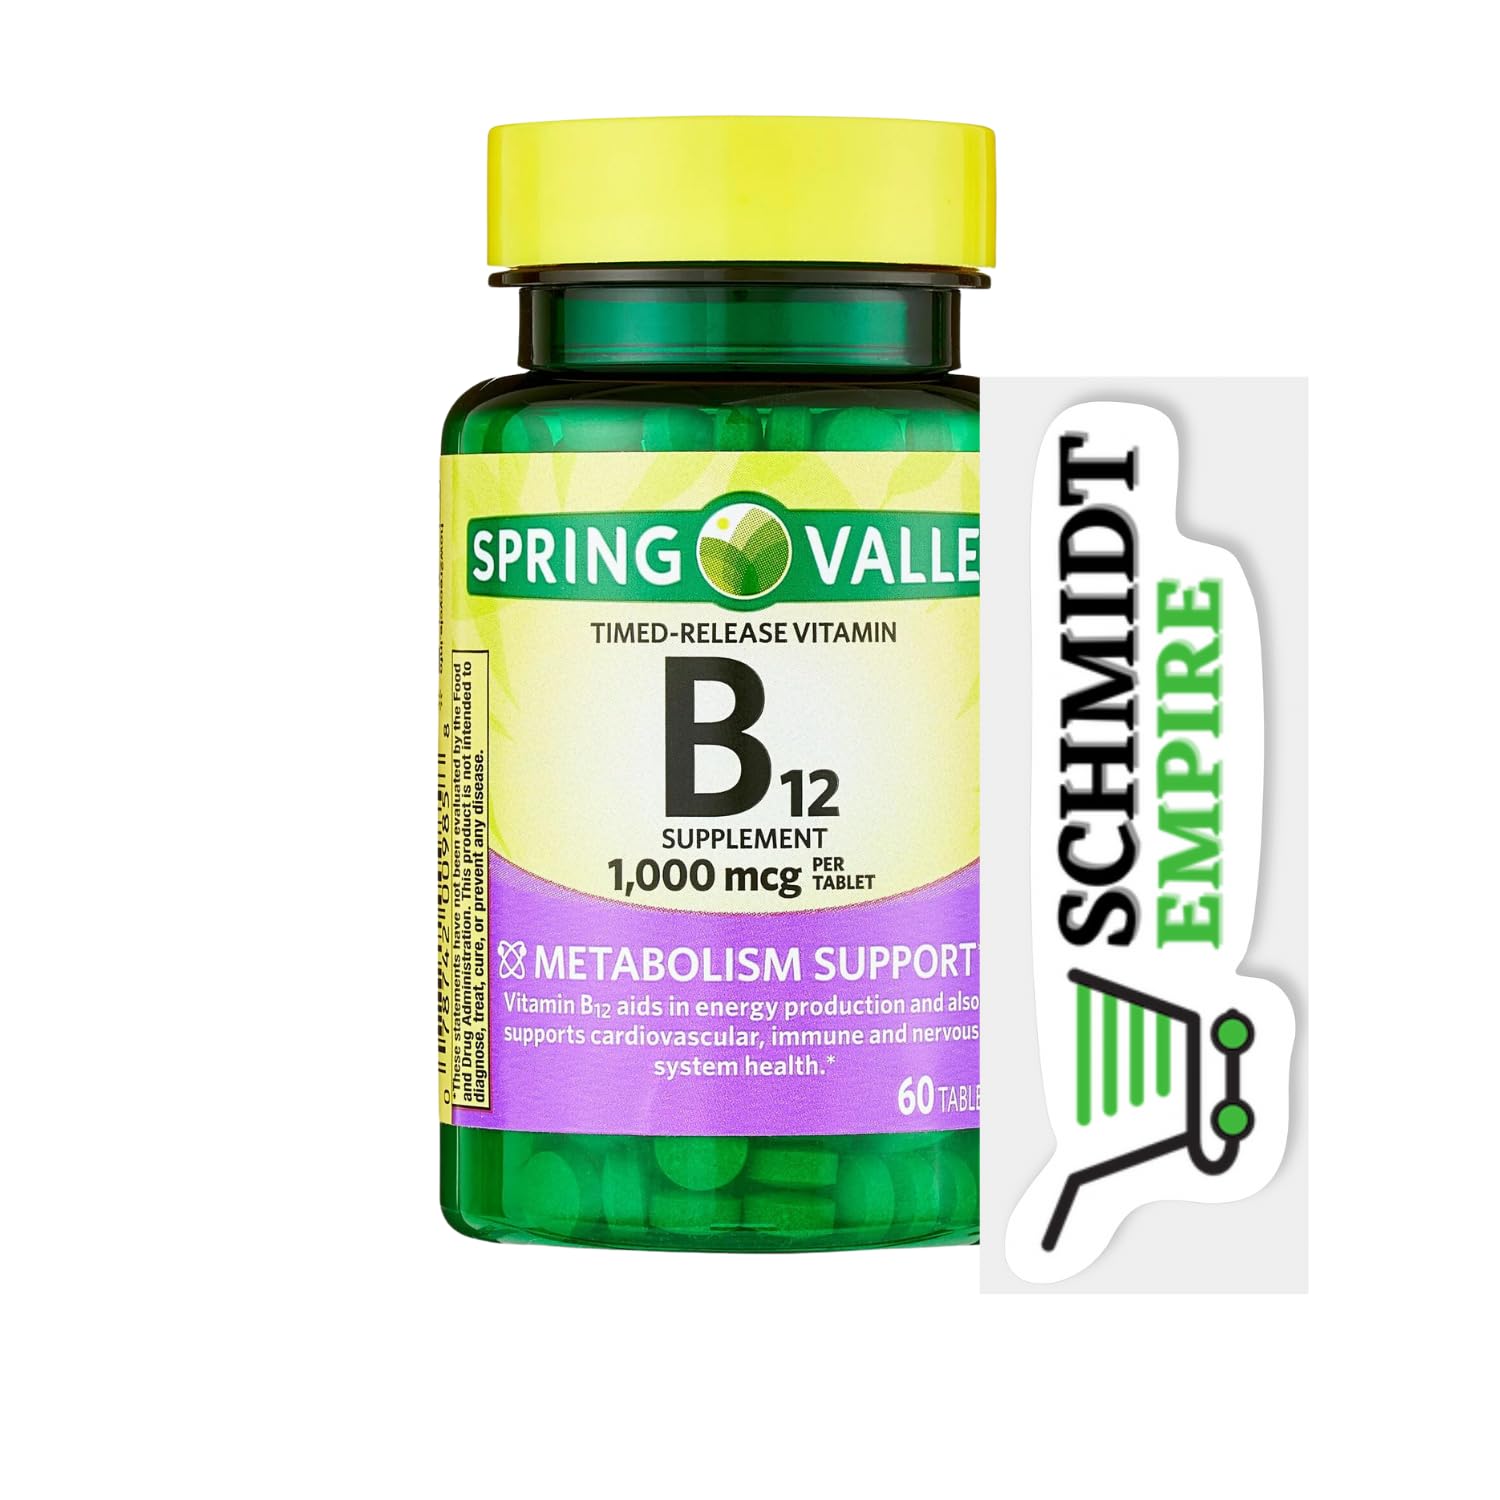 Schmidt Empire Vitamin B 12 1000 Mcg Timed Release By Spring Valley 60